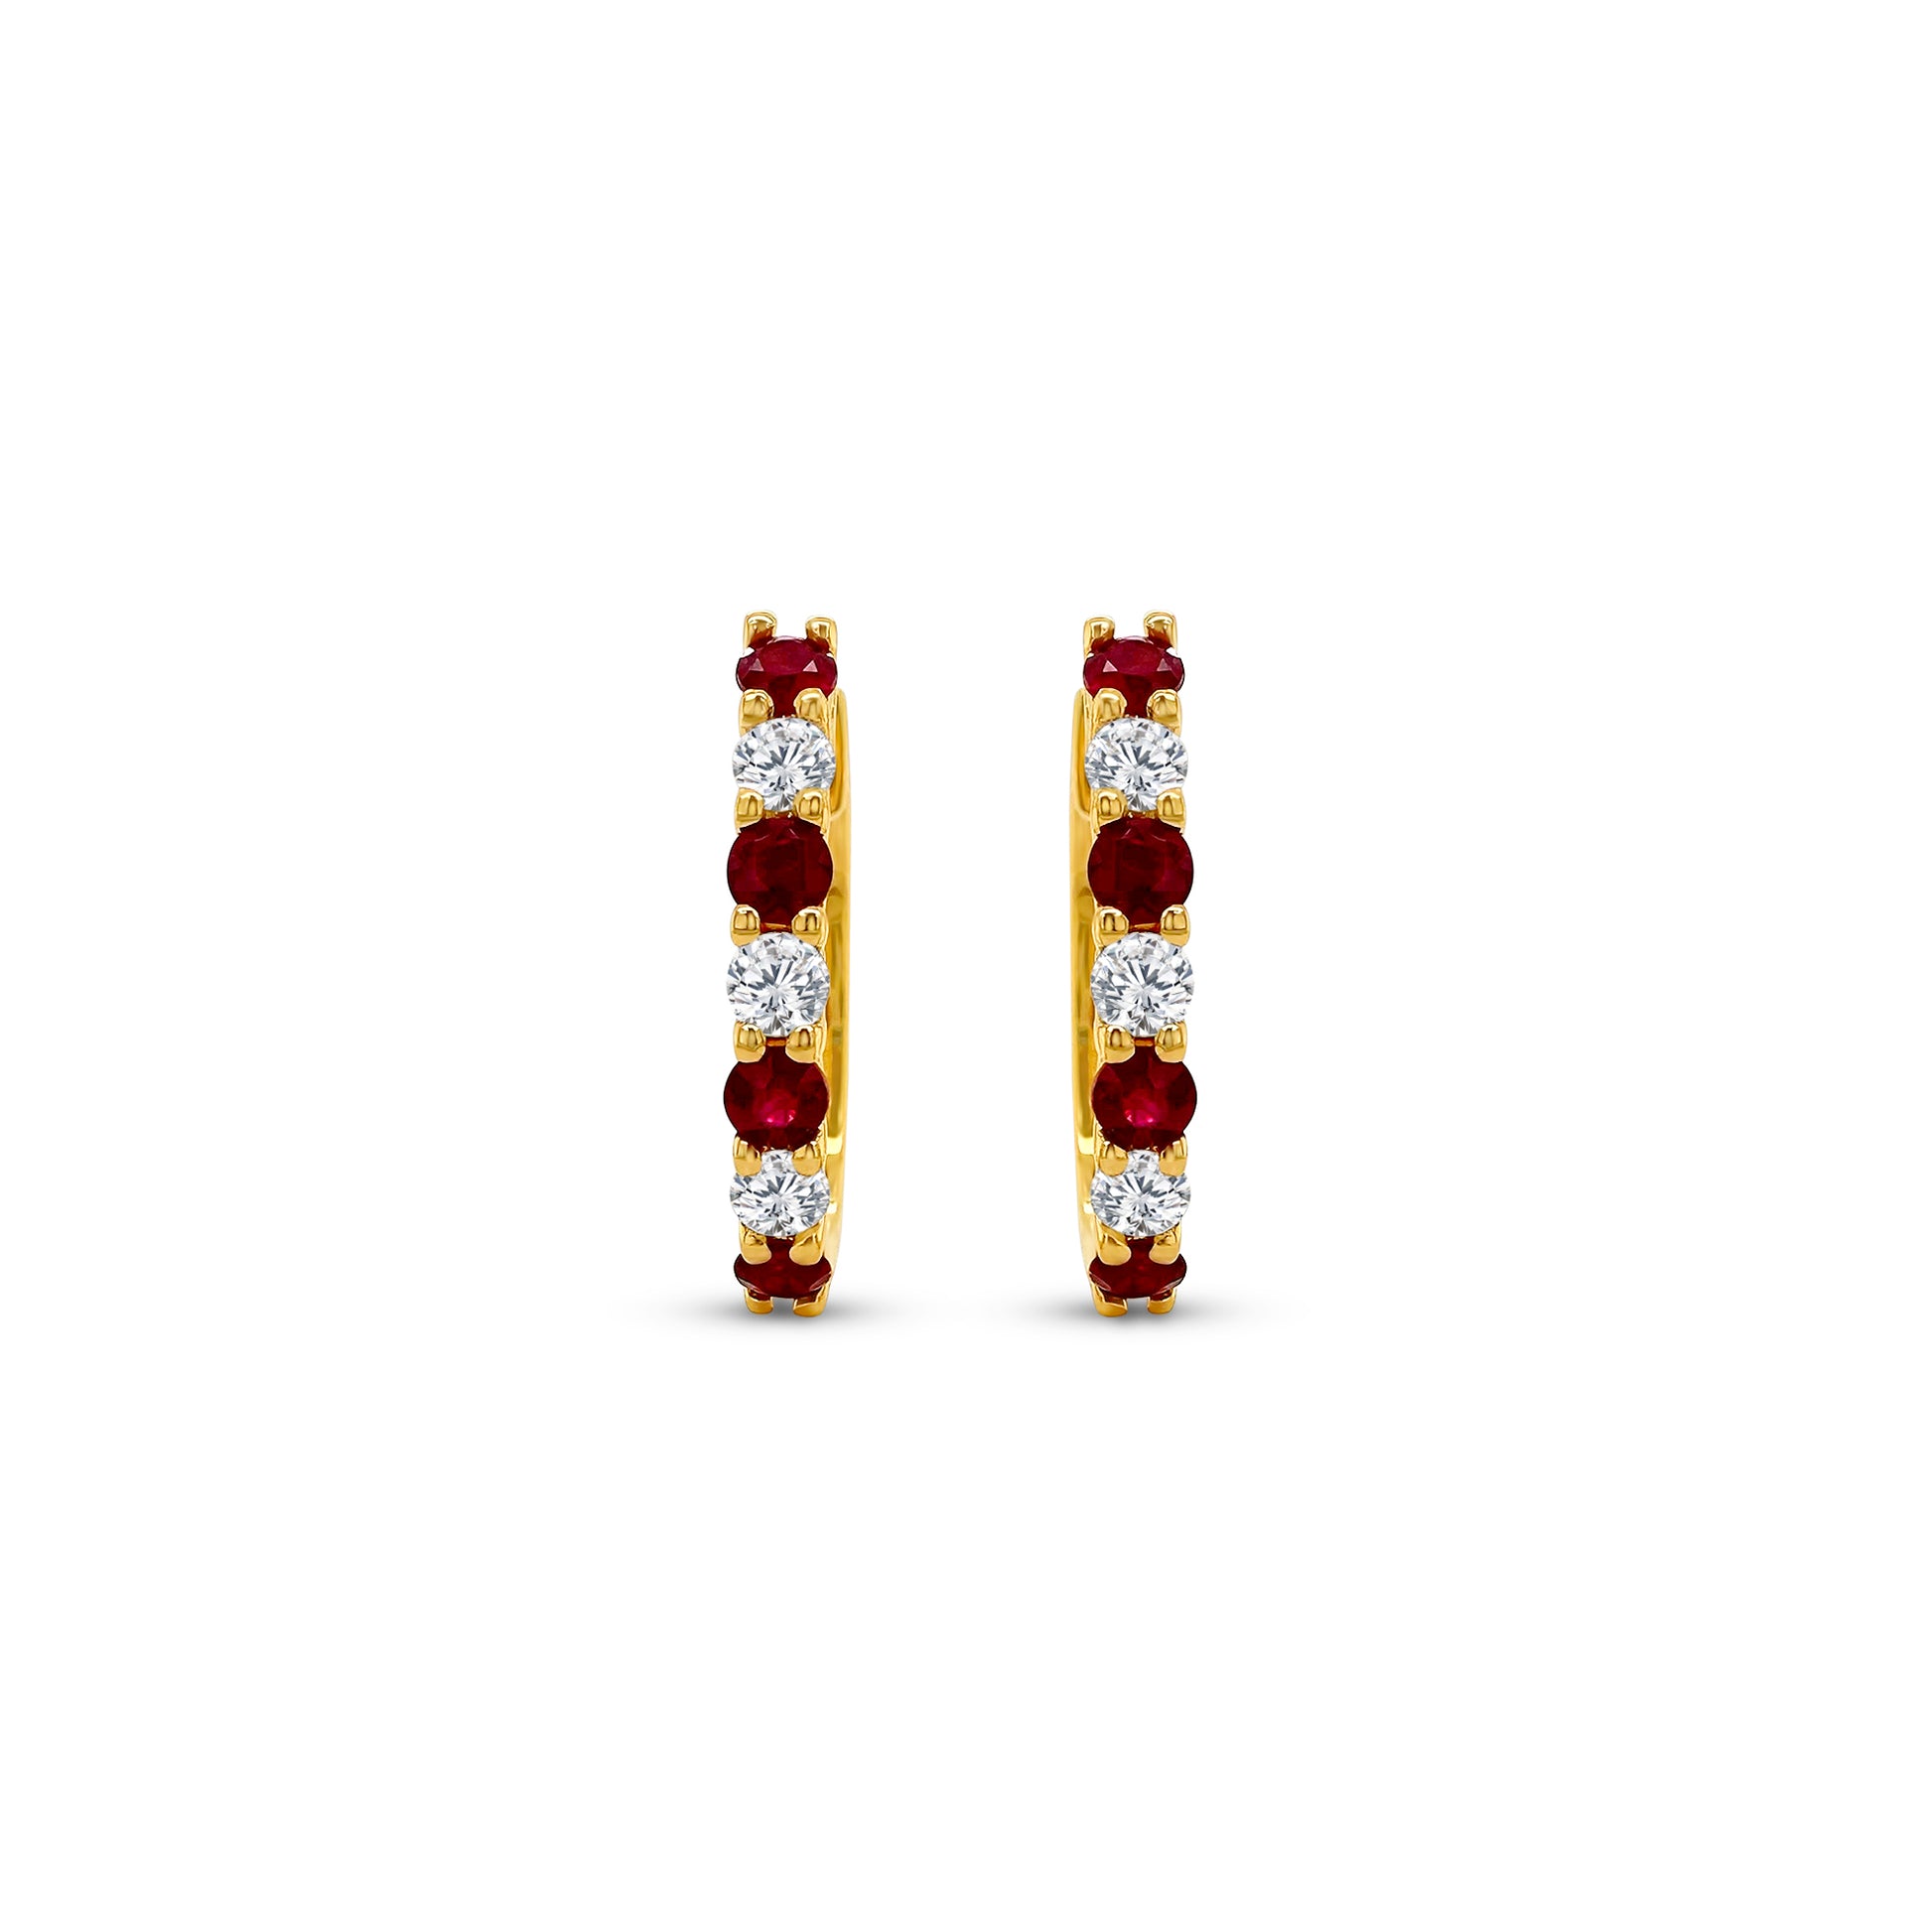 "Round Ruby Earrings, Diamond Huggy Earrings, Red Gemstone Jewelry, Sparkling Diamond Accents, Elegant Earrings, Fashion Accessories, Luxury Jewelry, Fine Jewelry, Glamorous Earrings, Statement Earrings, Precious Gemstone Earrings, Stylish Accessories, High-Quality Jewelry, Classy Earrings, Stunning Ruby and Diamond Earrings"